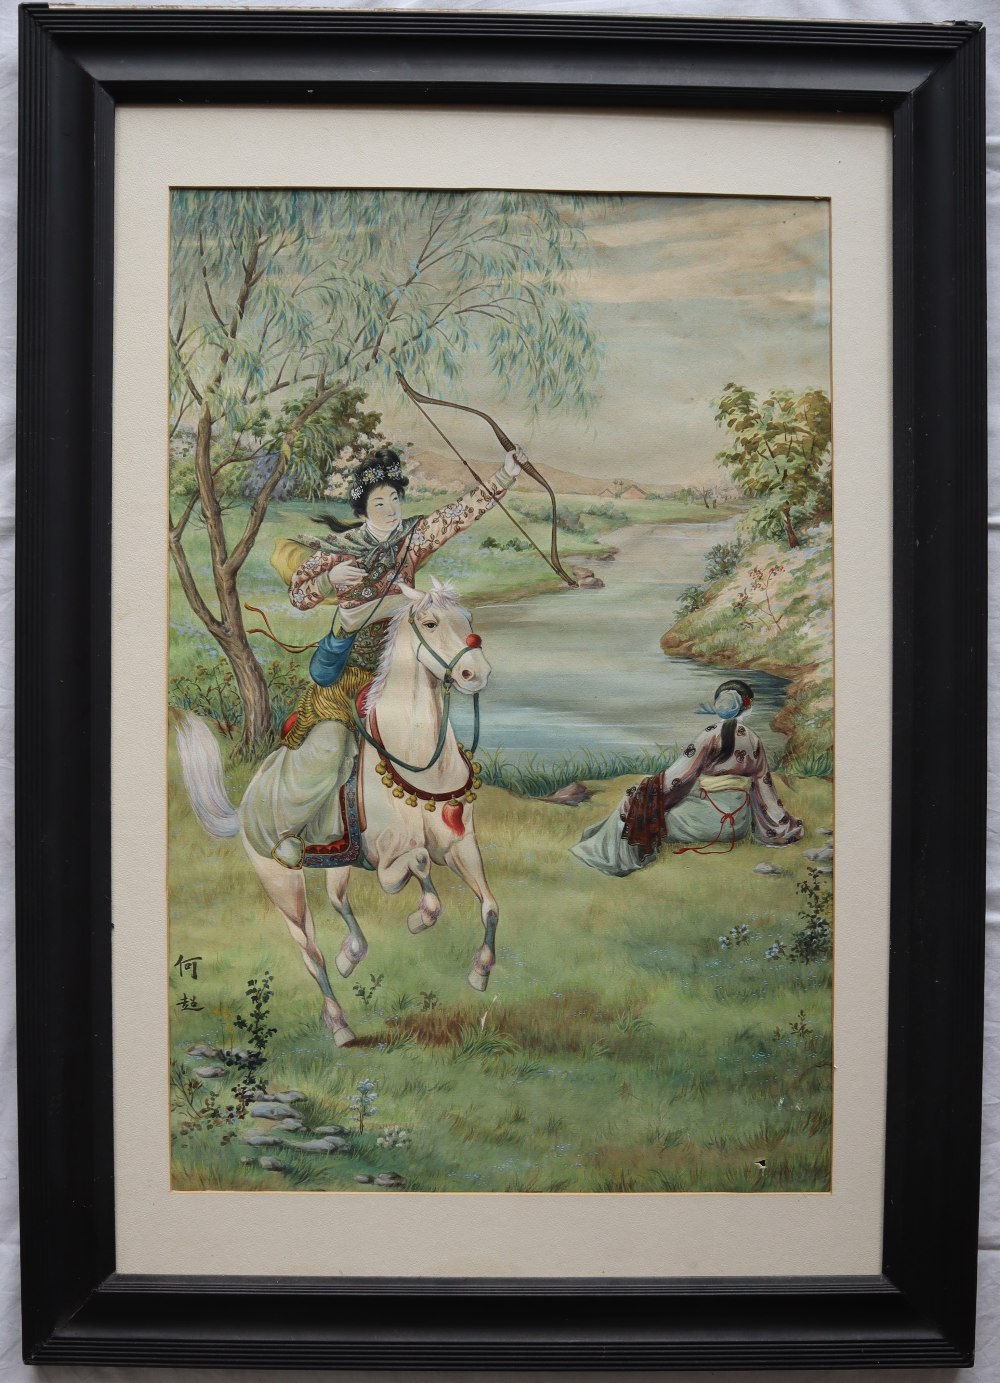 20th Century Chinese School An archer on horseback, - Image 2 of 8